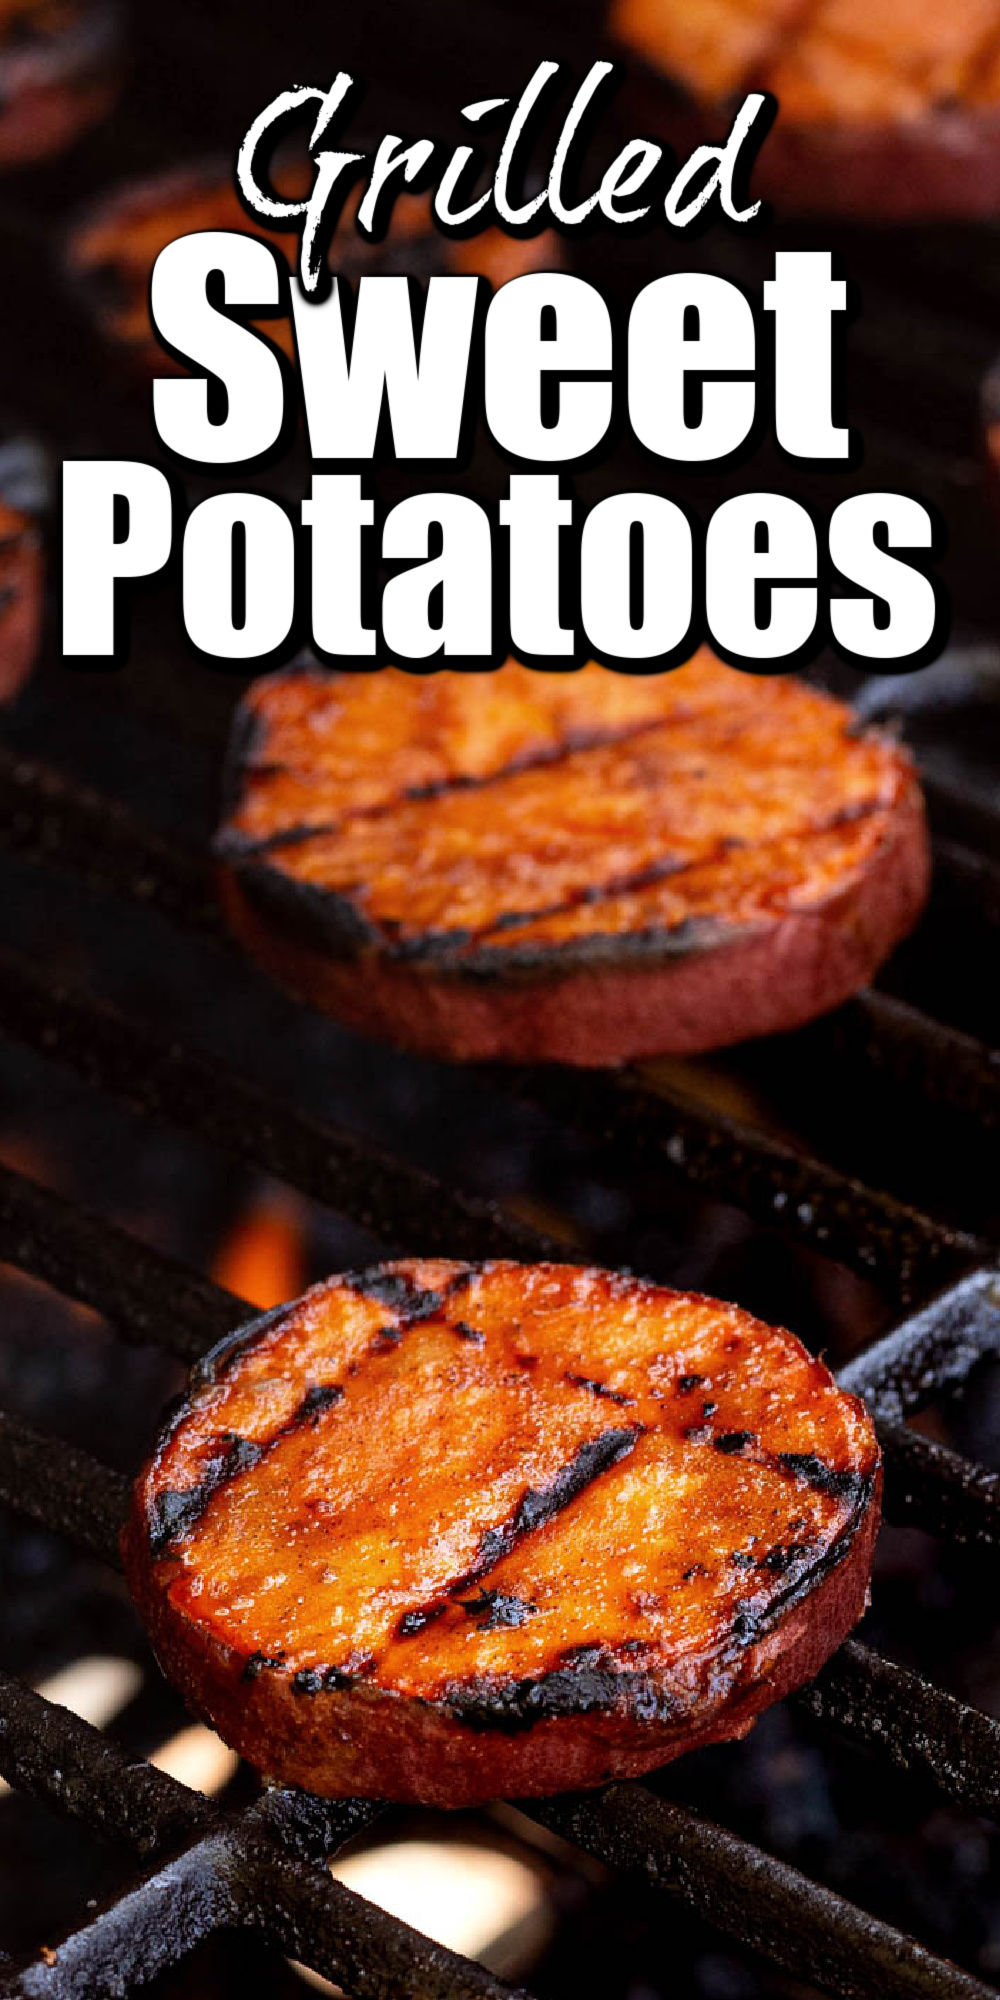 These Grilled Sweet Potatoes glazed with butter, brown sugar and cinnamon are tender, soft, and amazingly good!